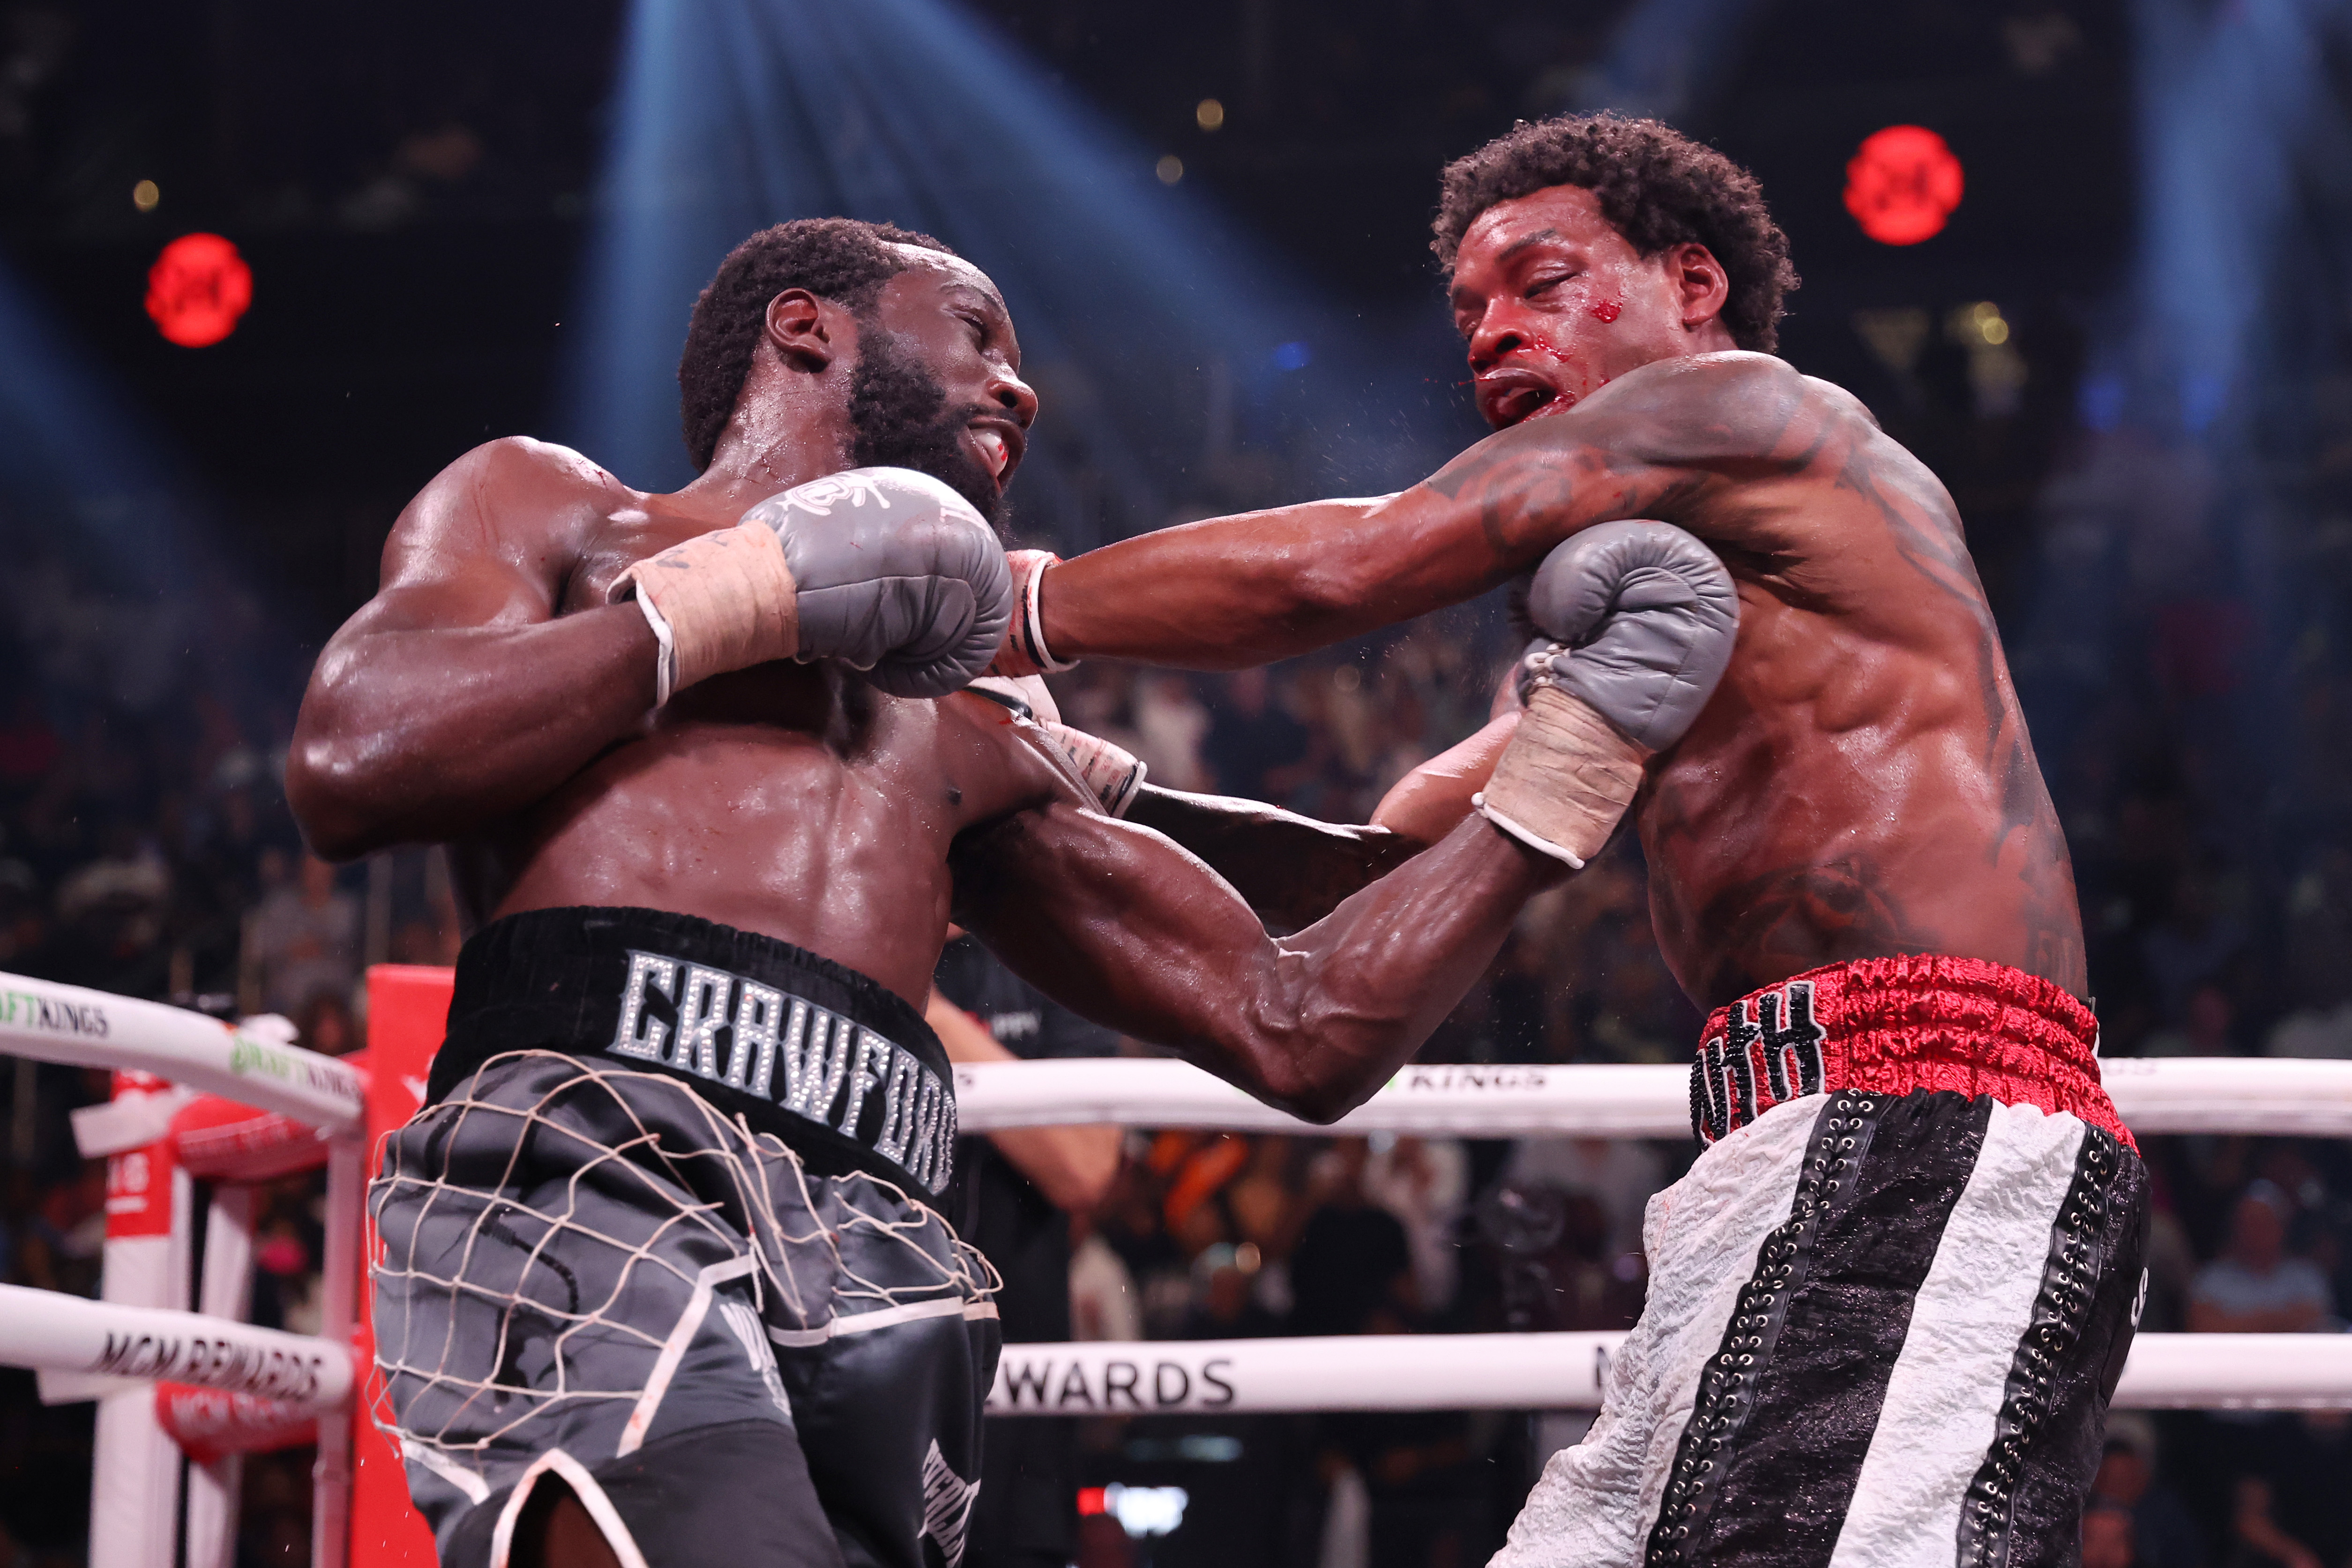 Errol Spence will look to redeem himself in a rematch with Terence Crawford.